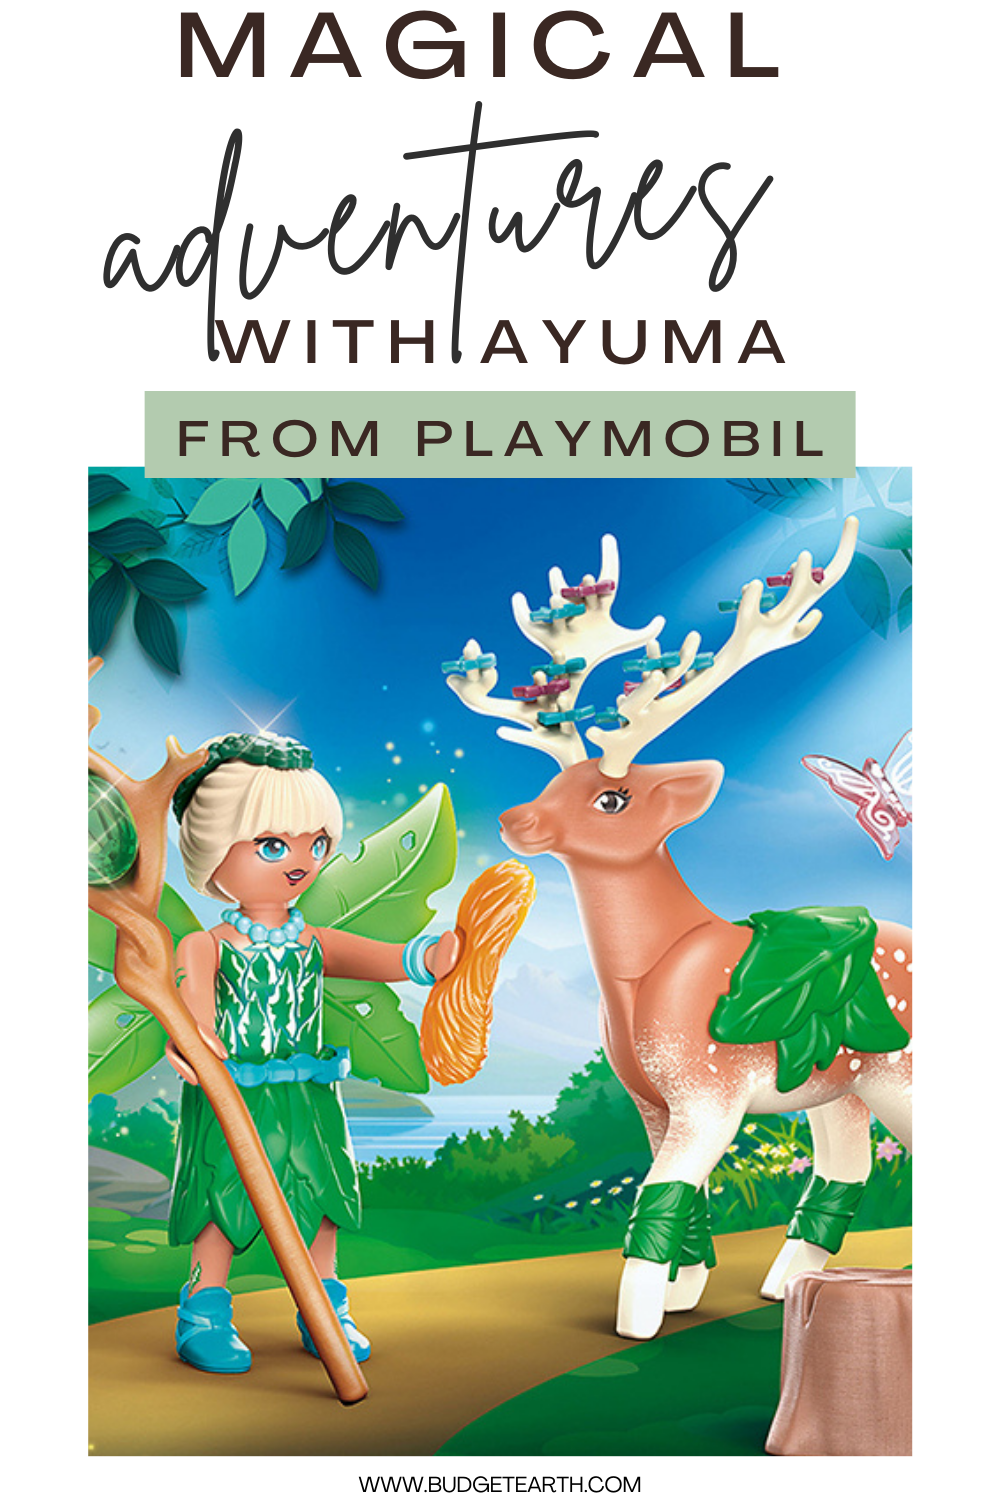 fairy playing with a stag feature image from Playmobil